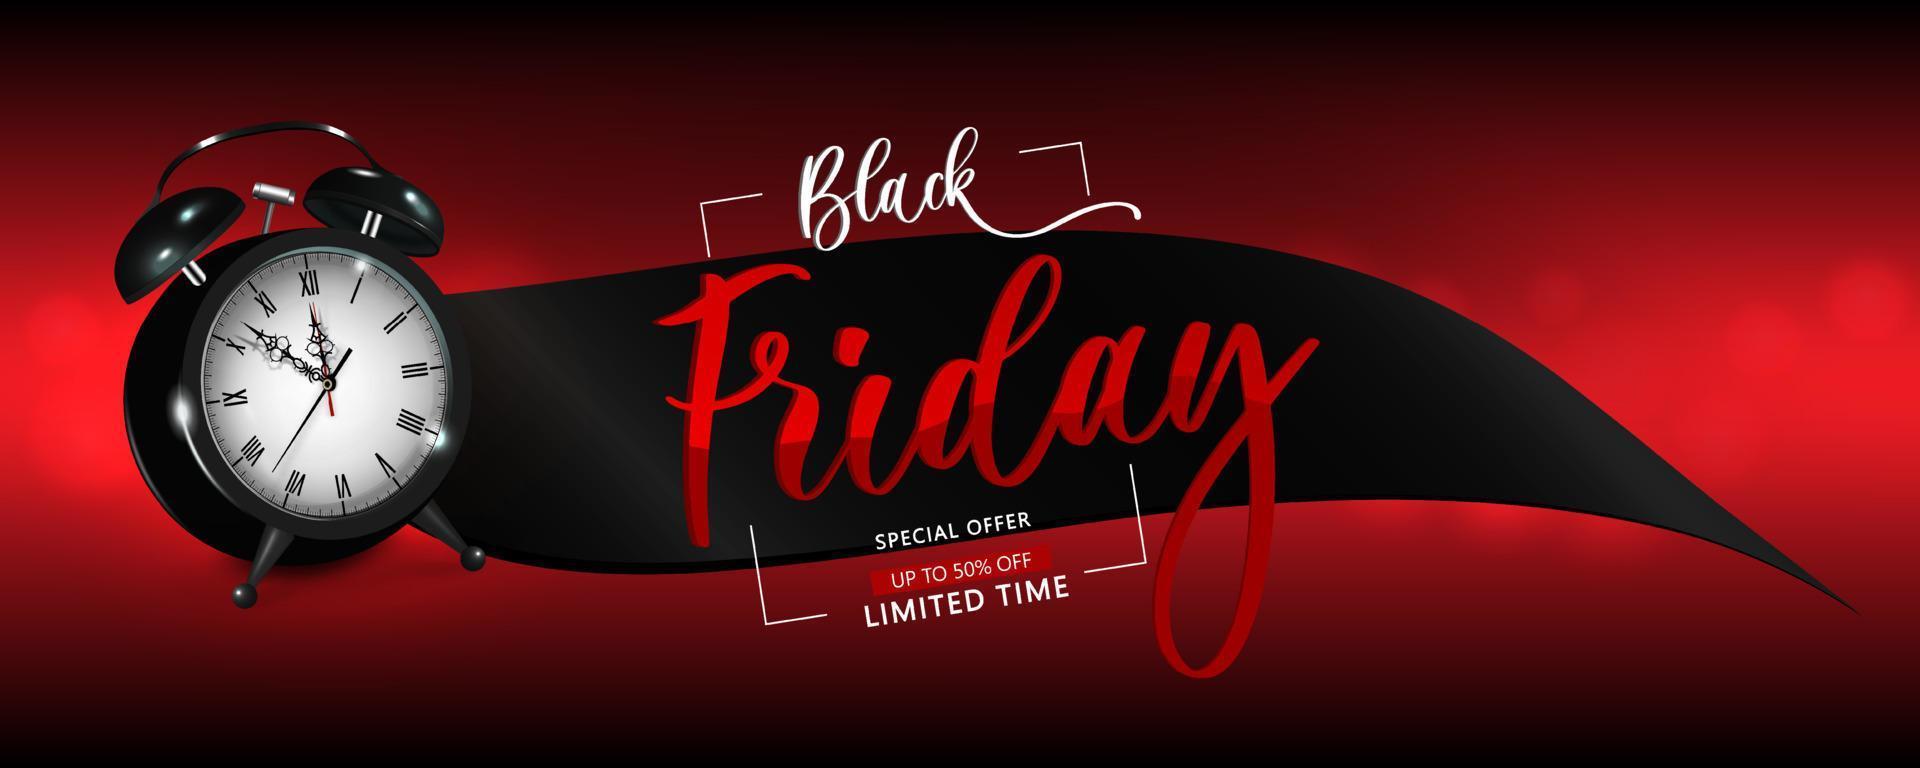 Black Friday in red on a black ribbon with an alarm clock. Holiday sale illustration, discounts. Vintage design for purchase. vector